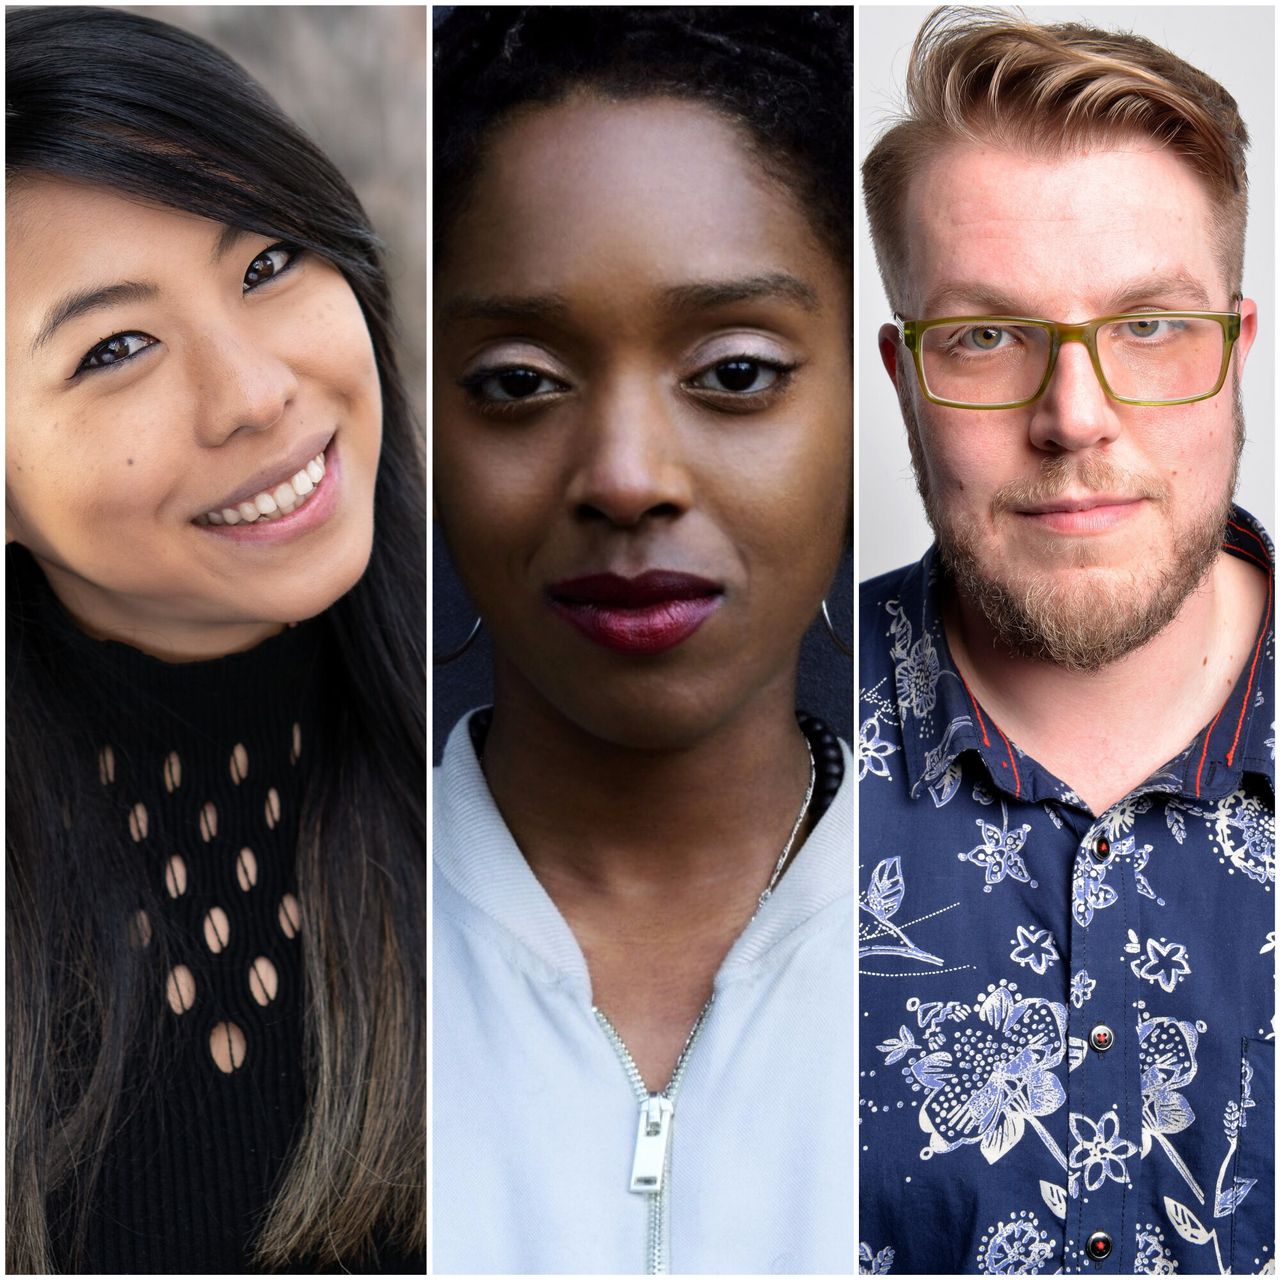 Six comedians share their thoughts on the future of comedy with HuffPost UK